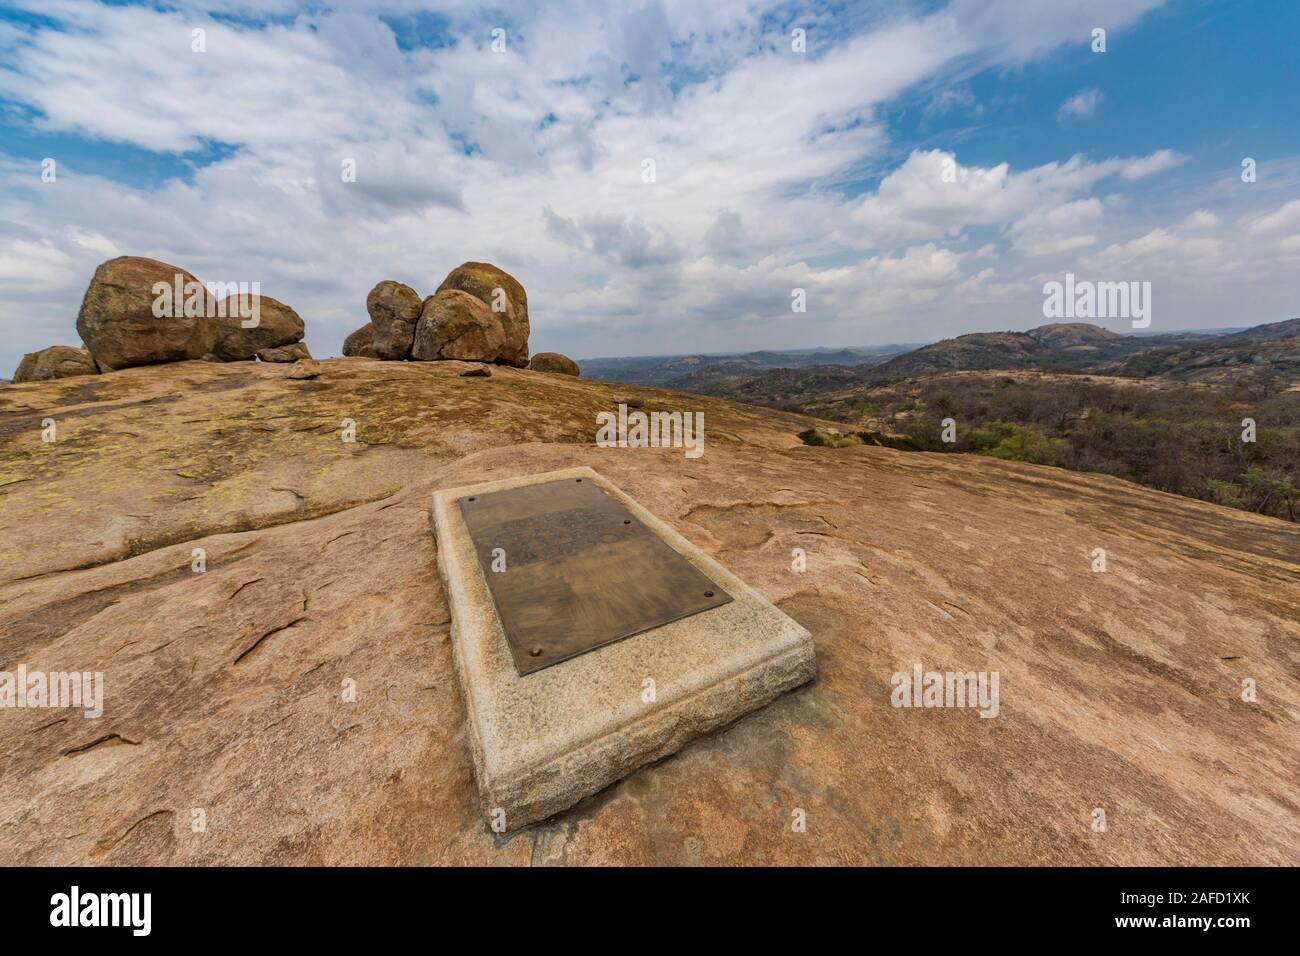 Matobo Hills (formerly Matopos) National Park, Zimbabwe. The Grave of one of Cecil Rhodes's aides in 'World's view', a hill towering above the park. Stock Photo